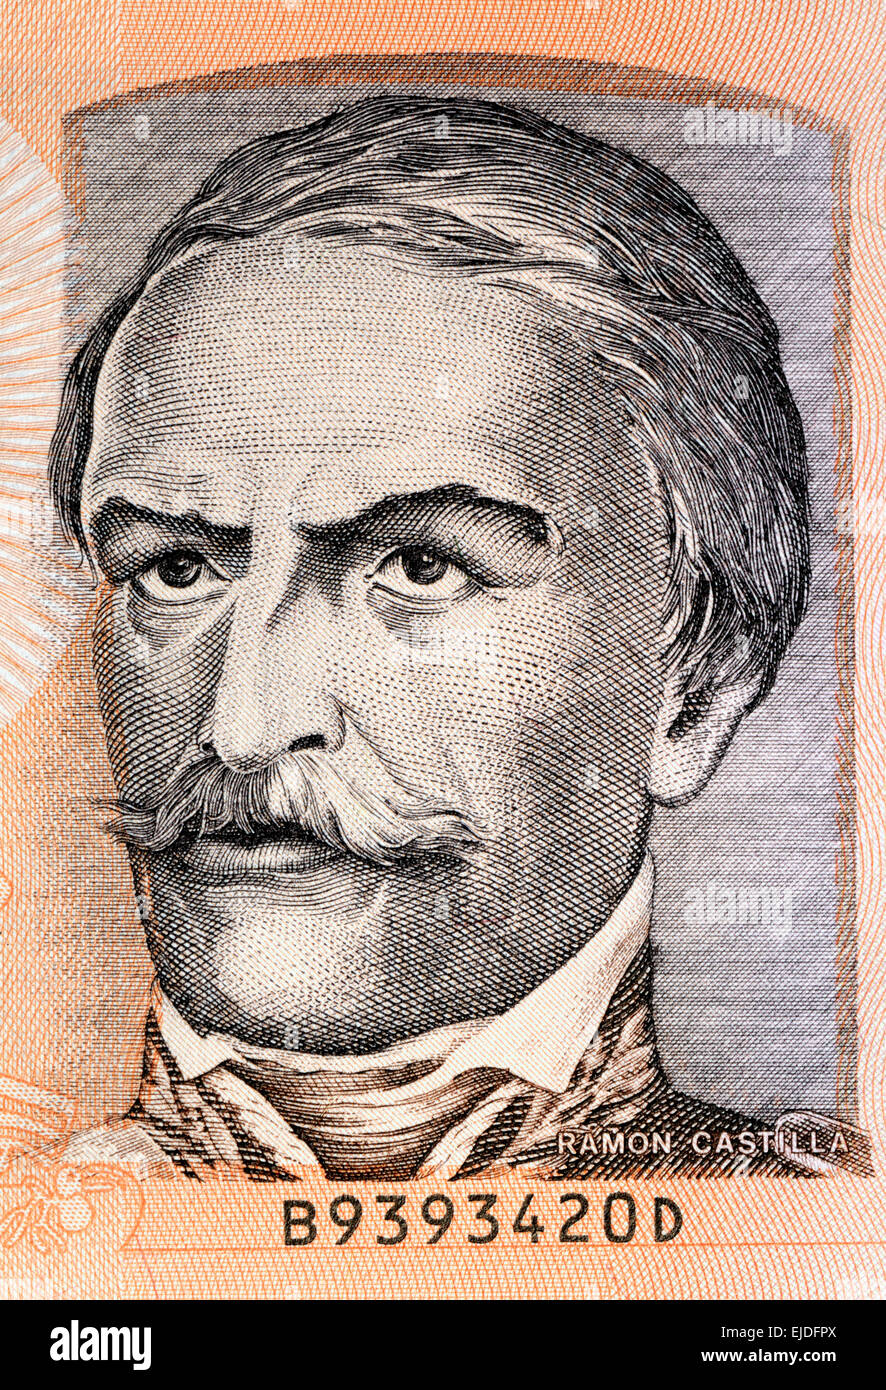 Detail from a Peruvian 100 Intis banknote showing Ramon Castilla ...